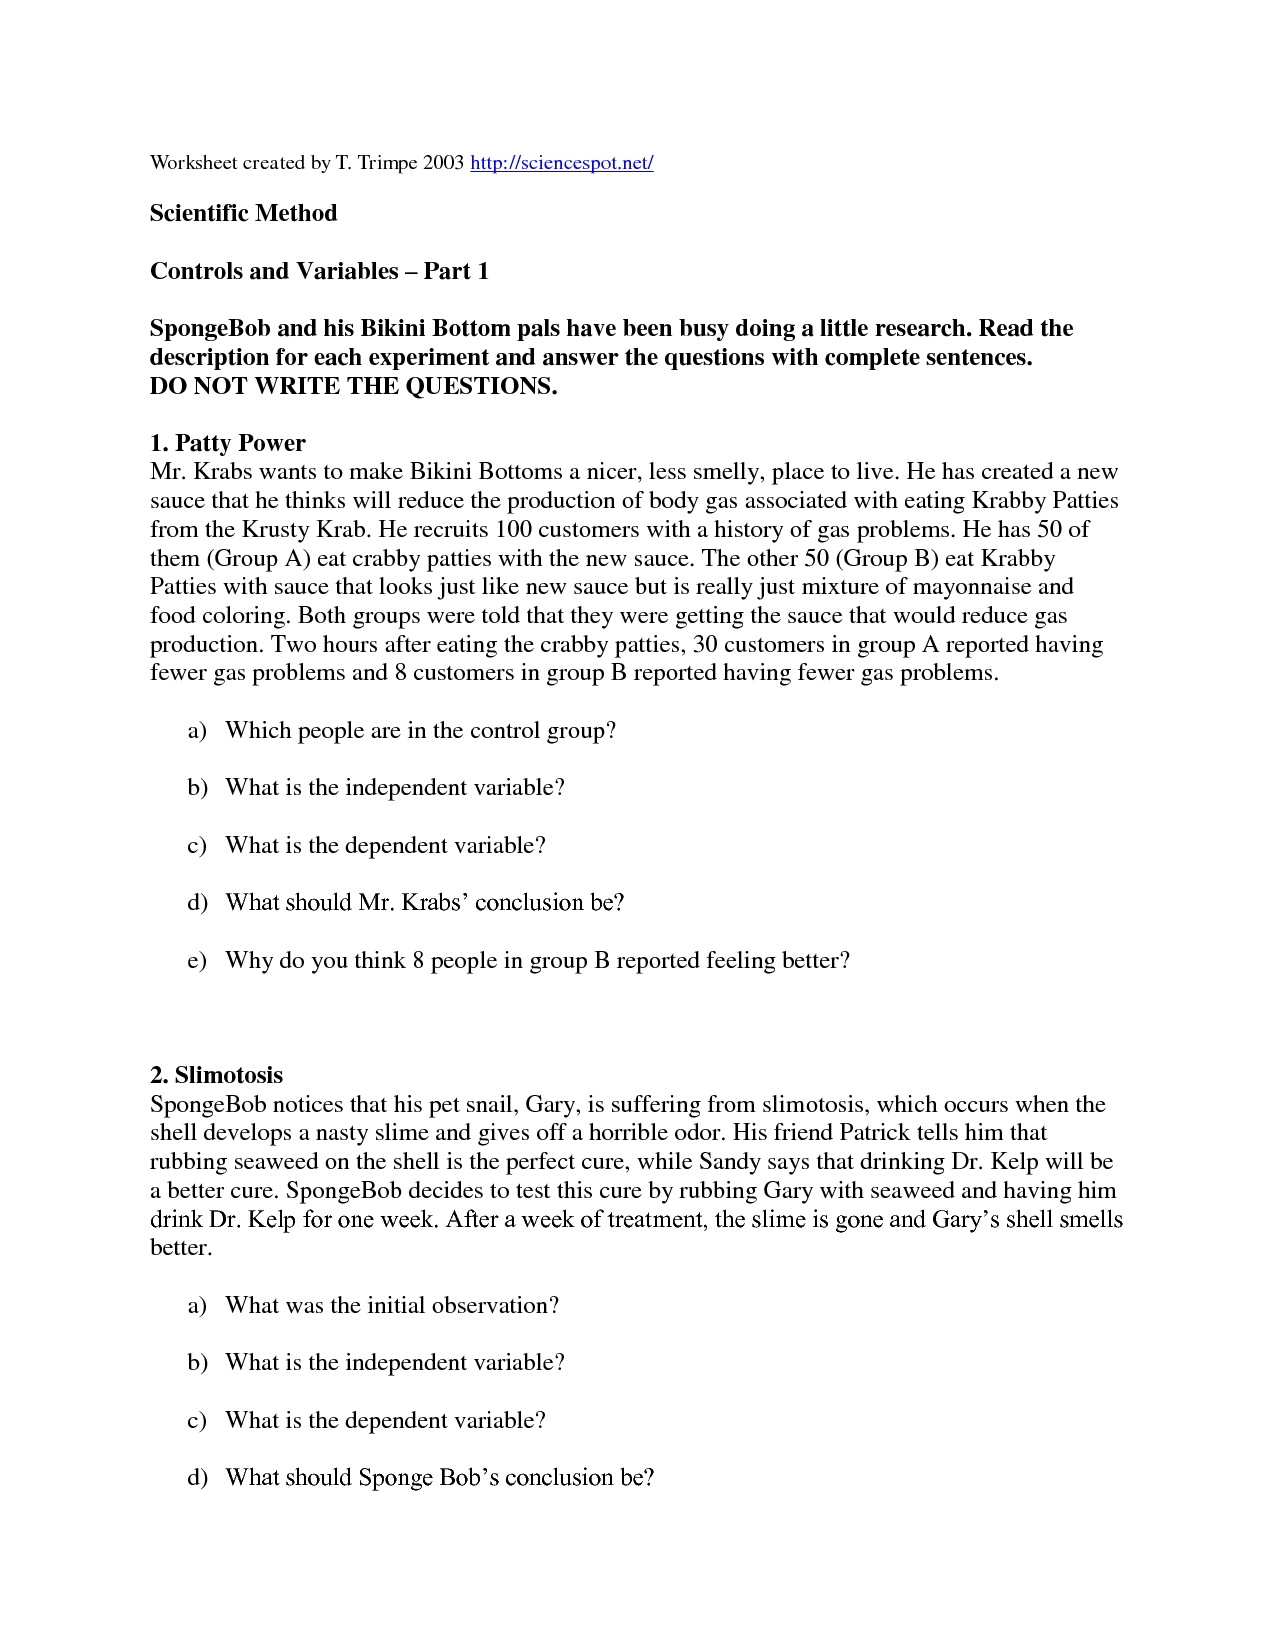 16-best-images-of-simpson-science-variable-worksheet-answer-controls